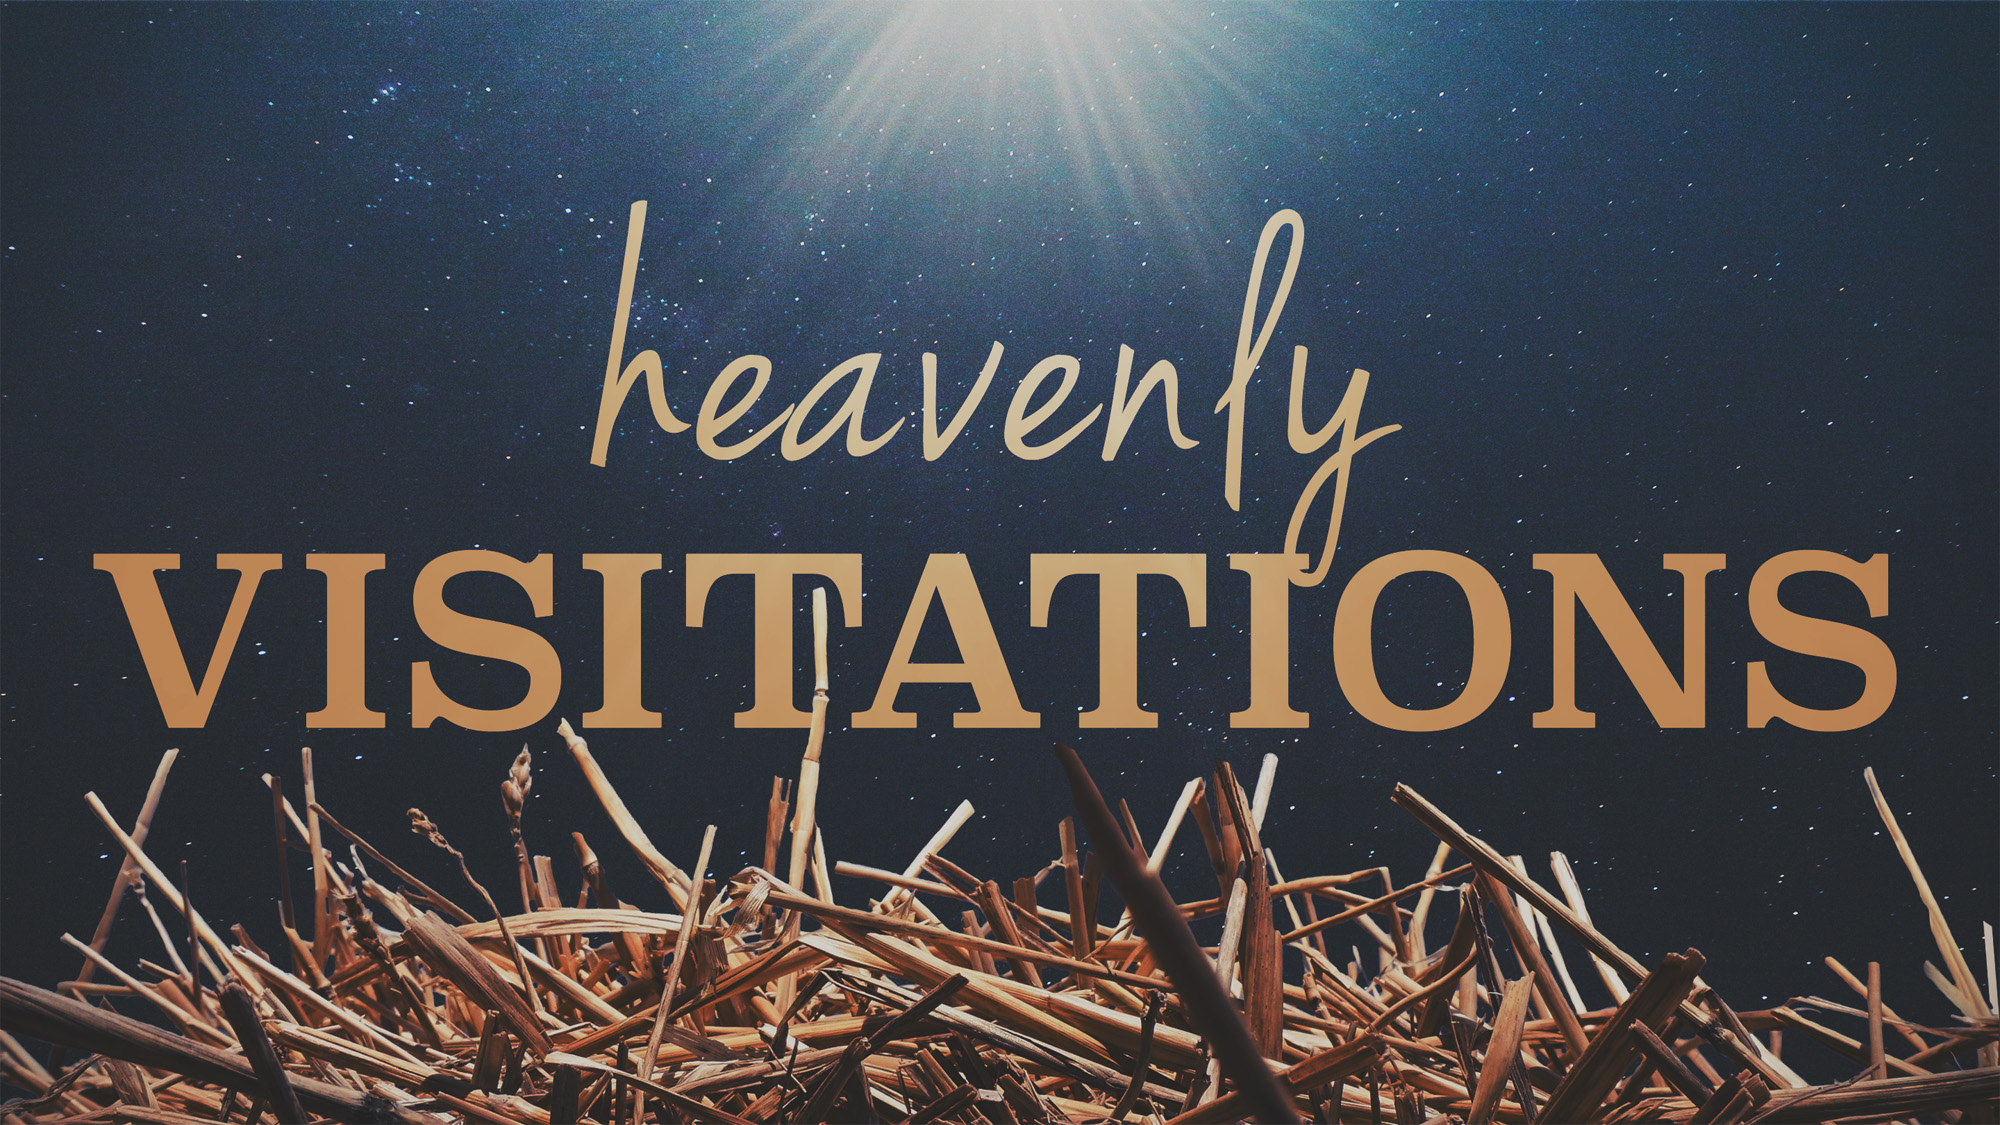 Heavenly Visitations: The Greatest One